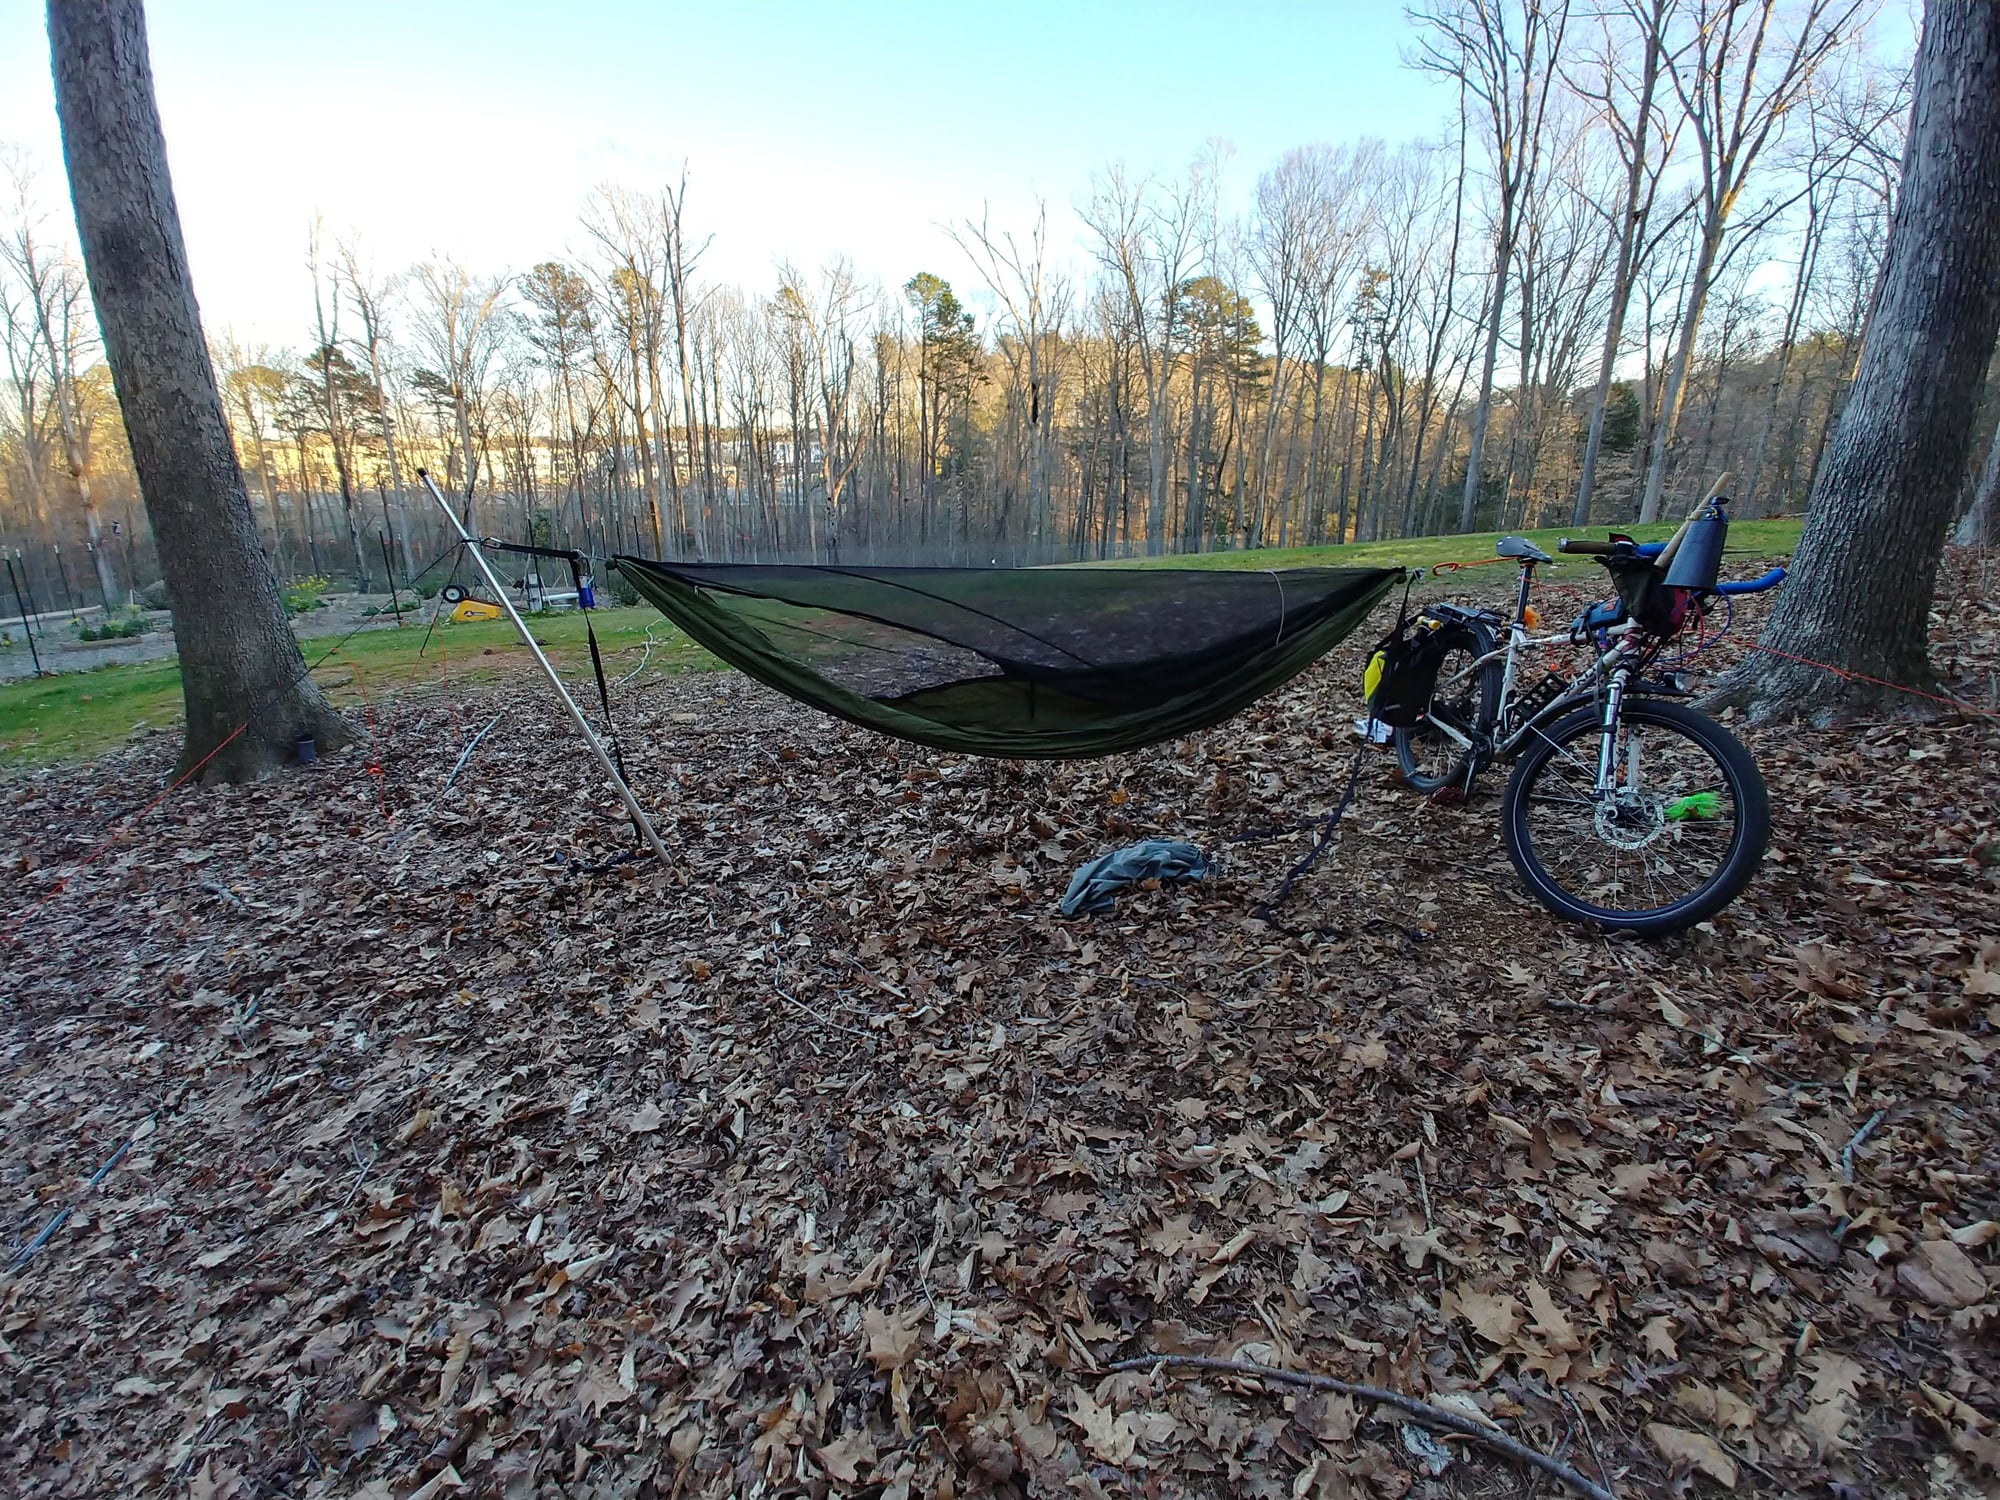 But what if there are no trees, you silly hammock-camper? - Bike